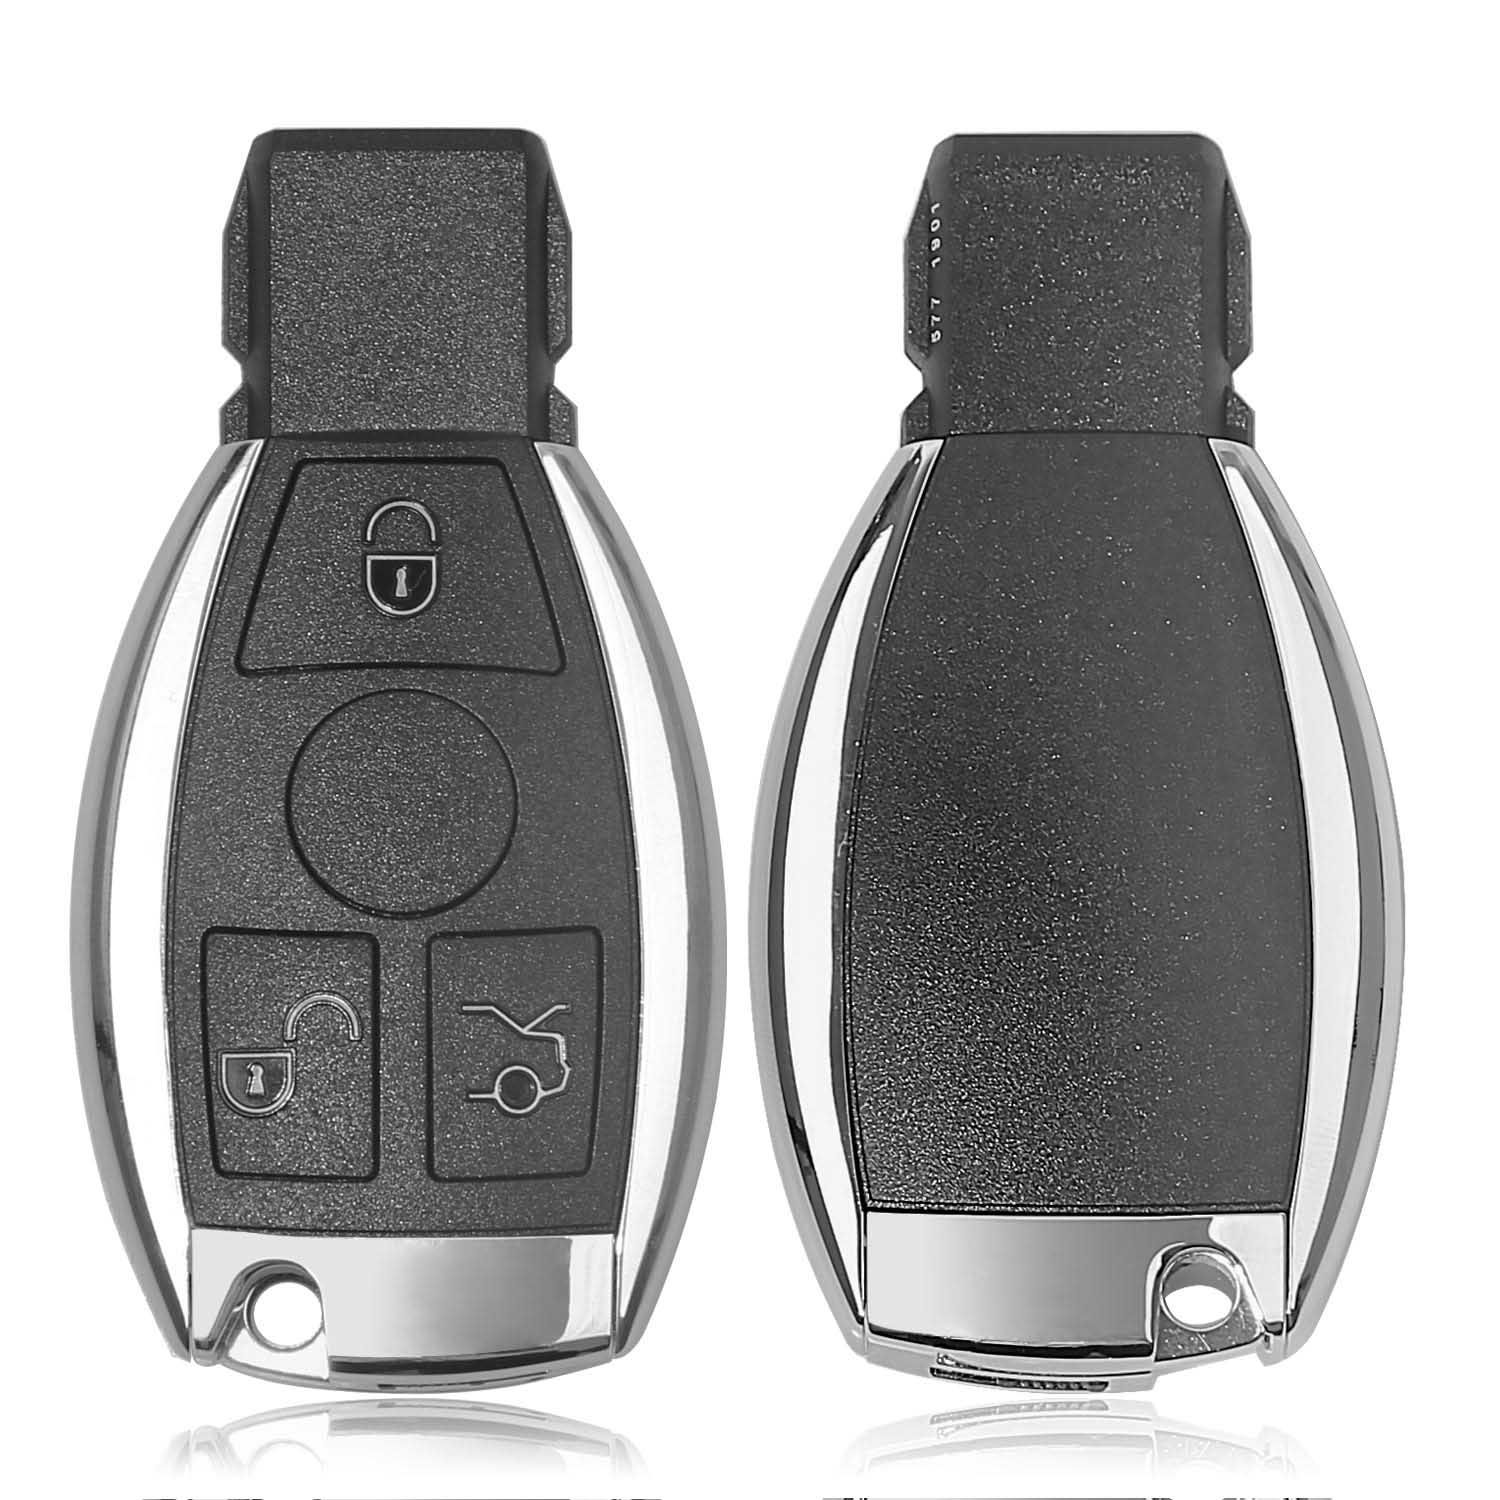 Xhorse VVDI BE Key Pro with Smart Key Shell 3 Button for Benz Key Package